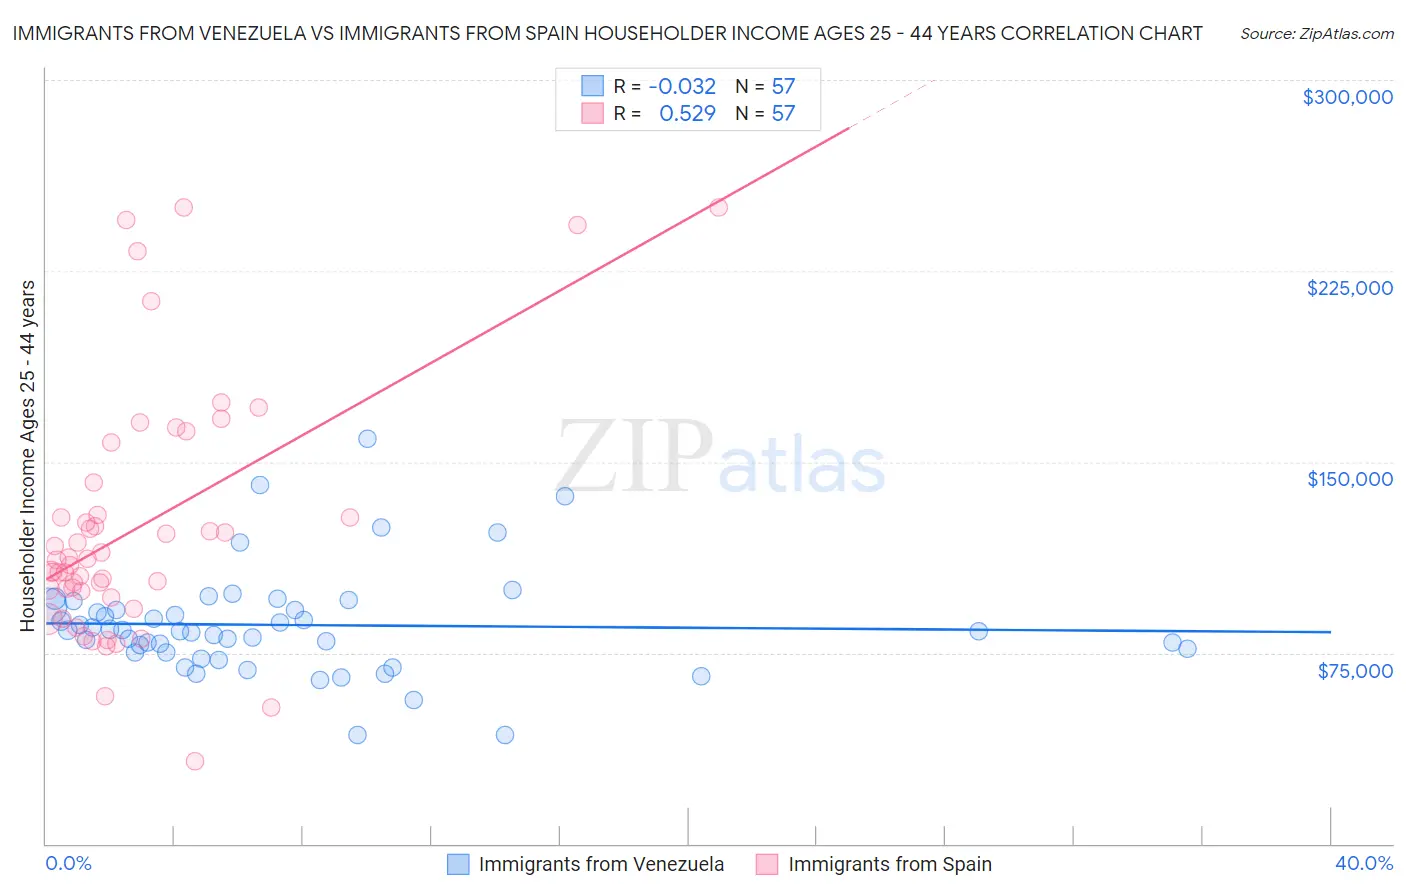 Immigrants from Venezuela vs Immigrants from Spain Householder Income Ages 25 - 44 years